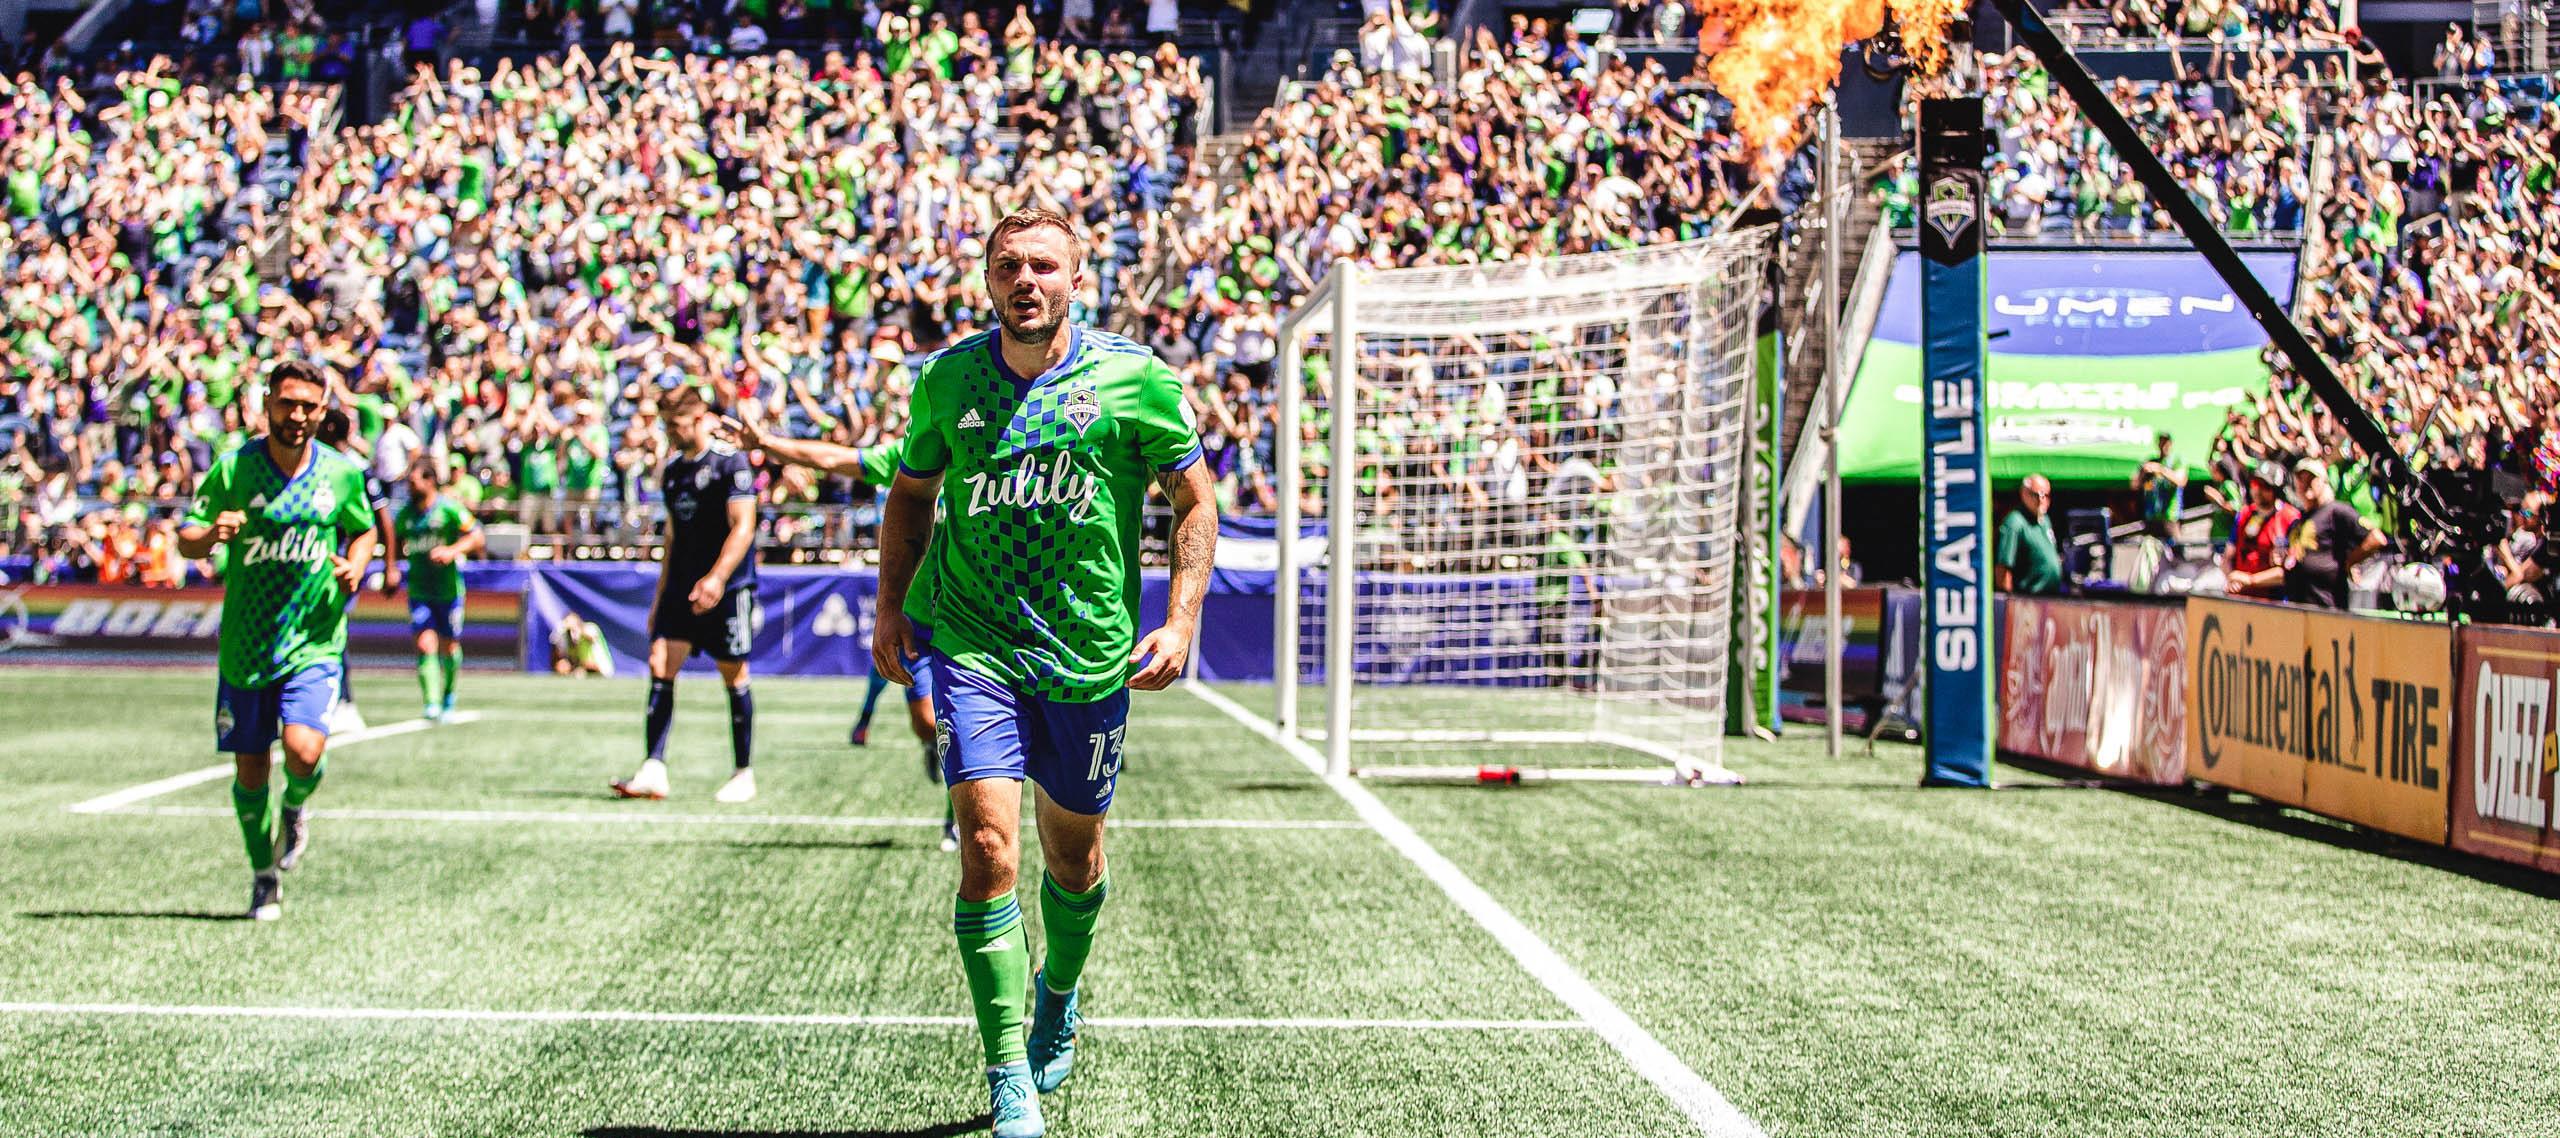 Top 2022 MLS Matches to Bet On El Trafico Rivalry Game, and Cascadia Cup Highlights Weekend Action